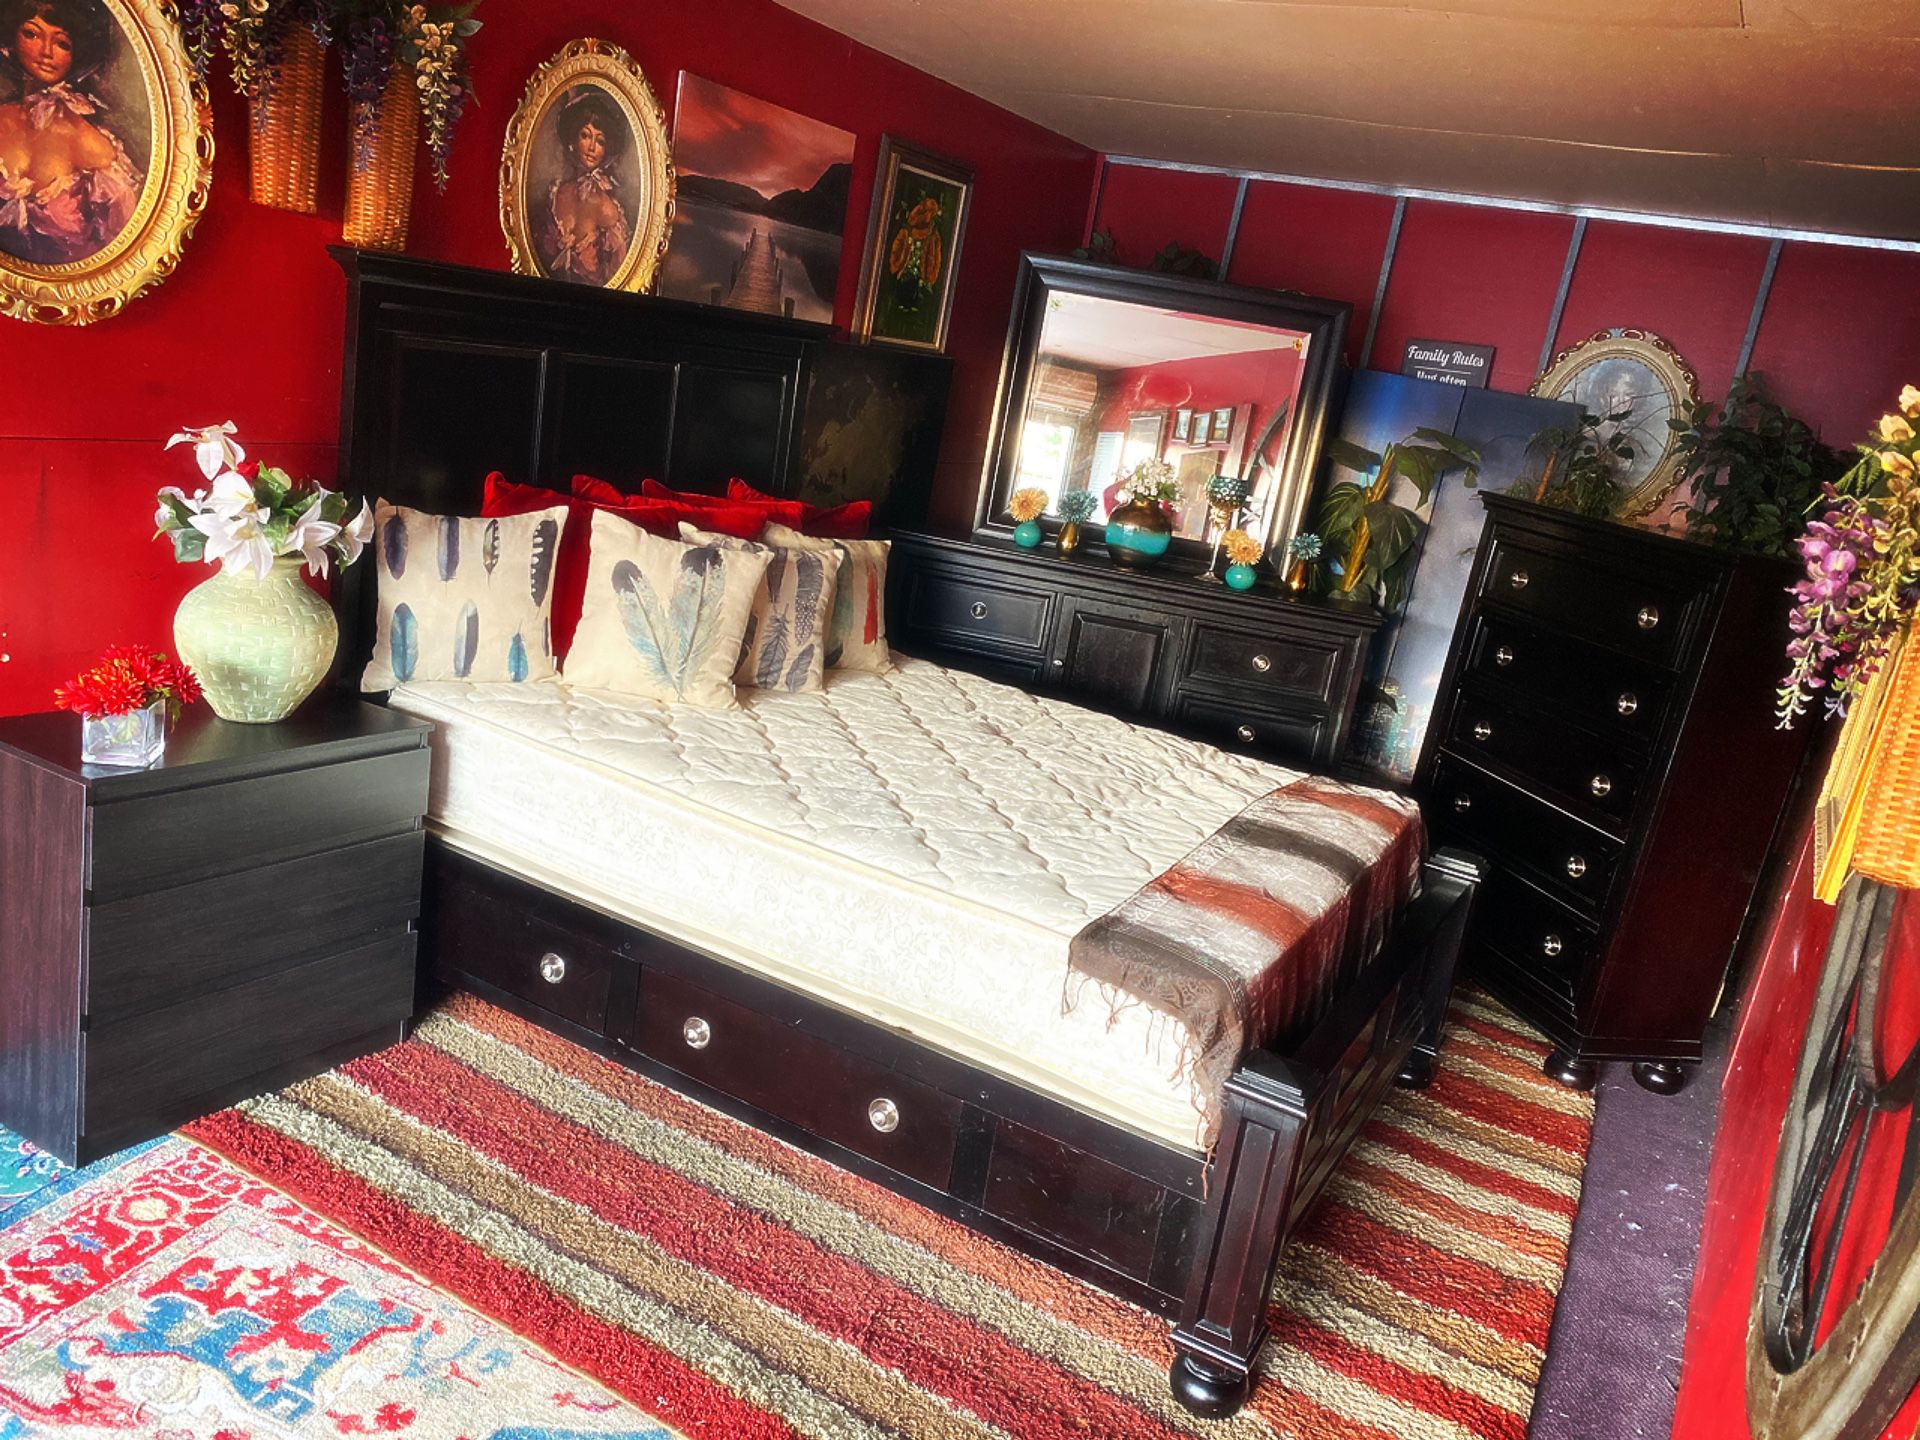 Modern queen size bedroom set, really nice and big